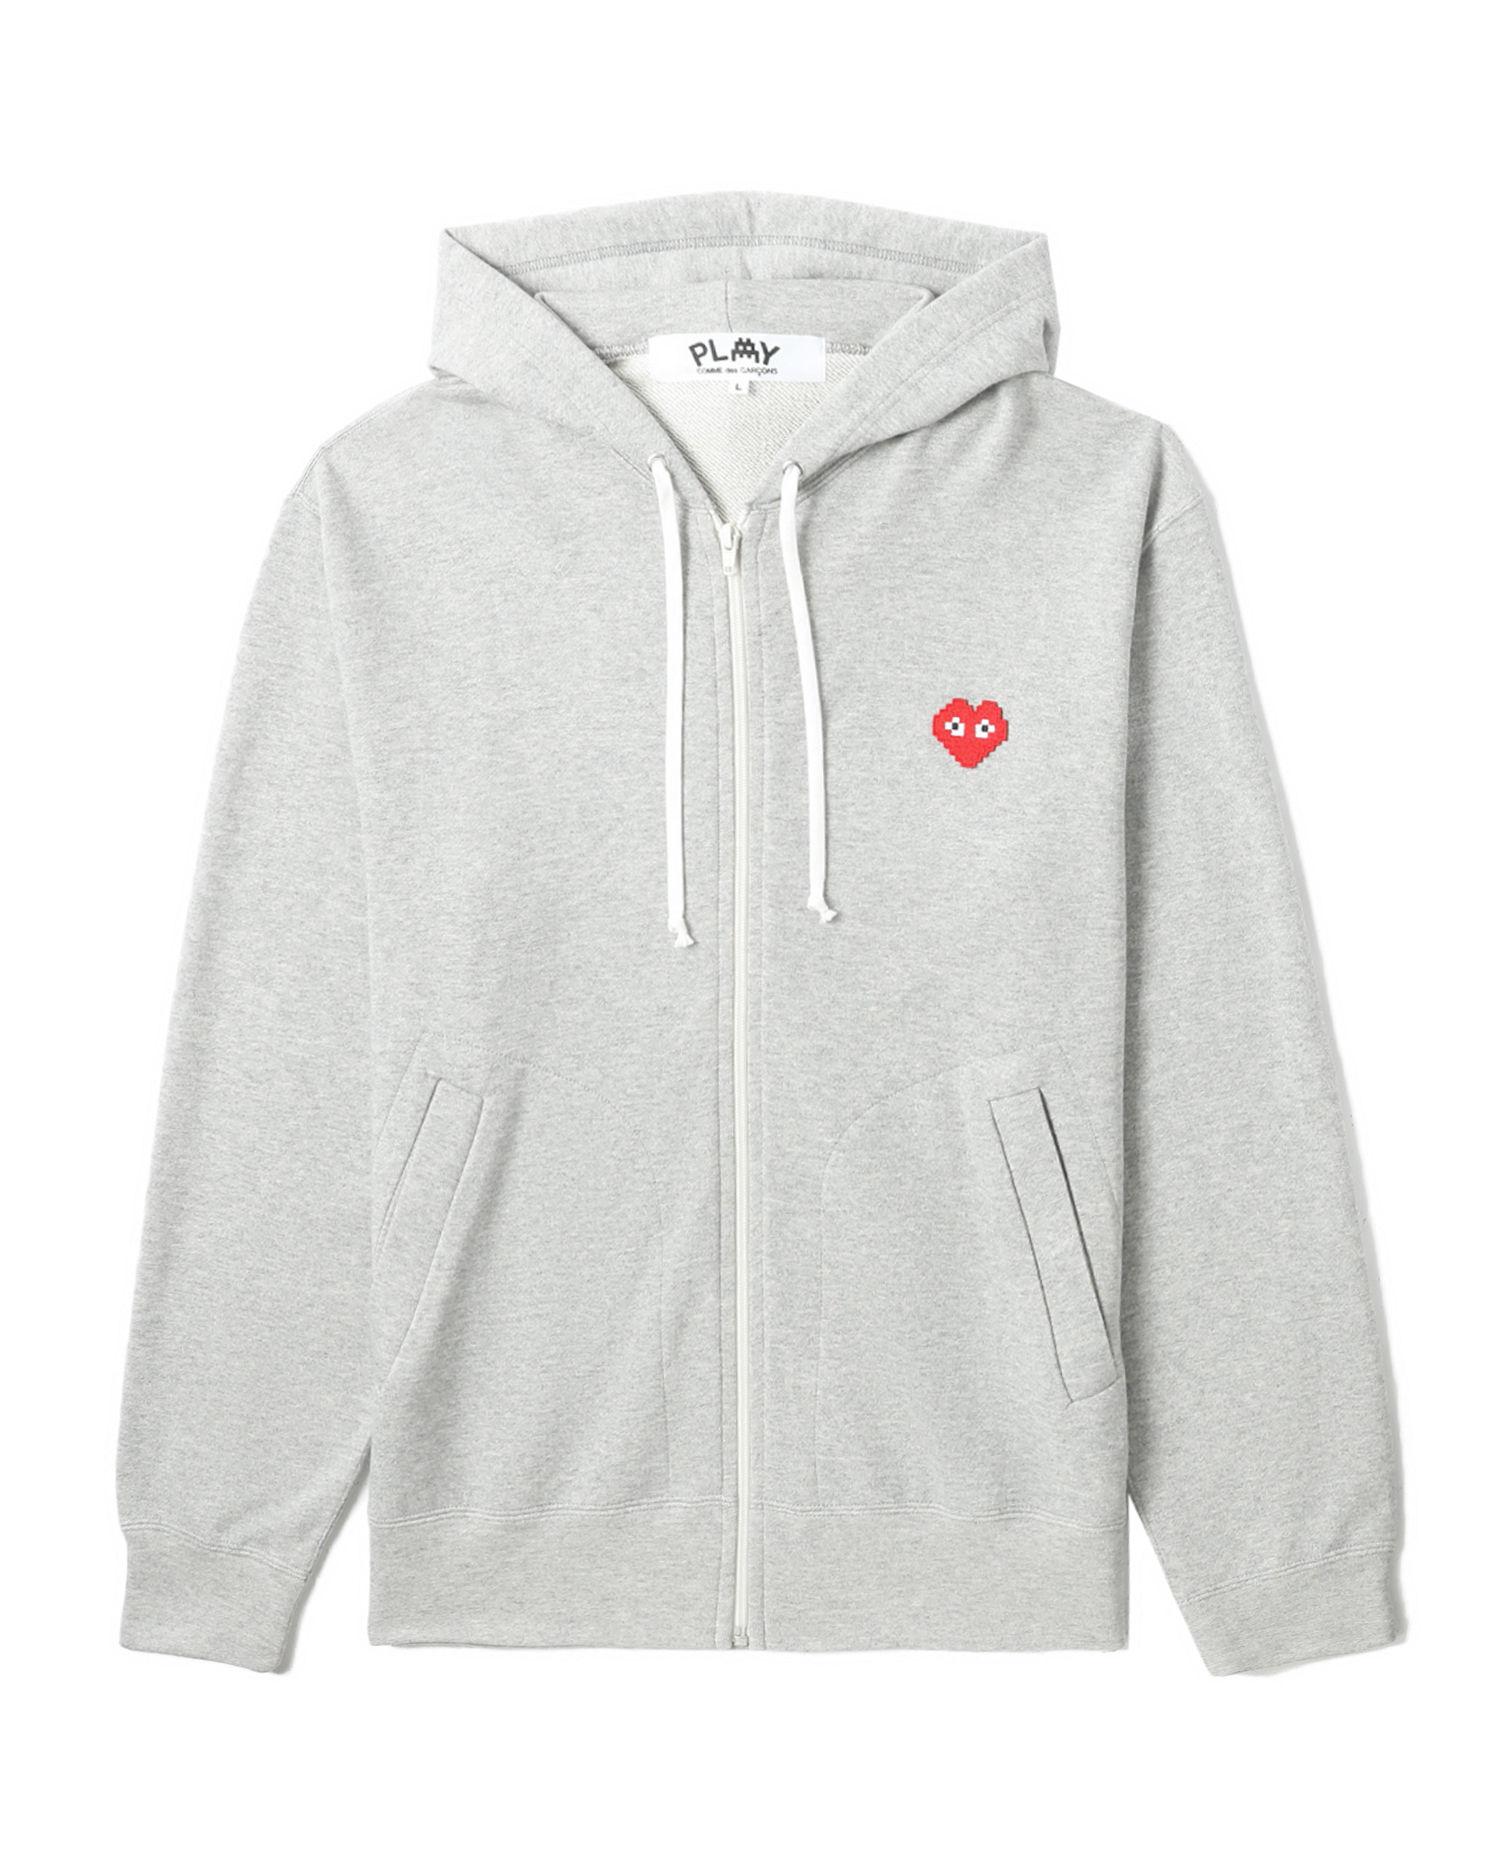 X INVADER logo zip hoodie by COMME DES GARCONS